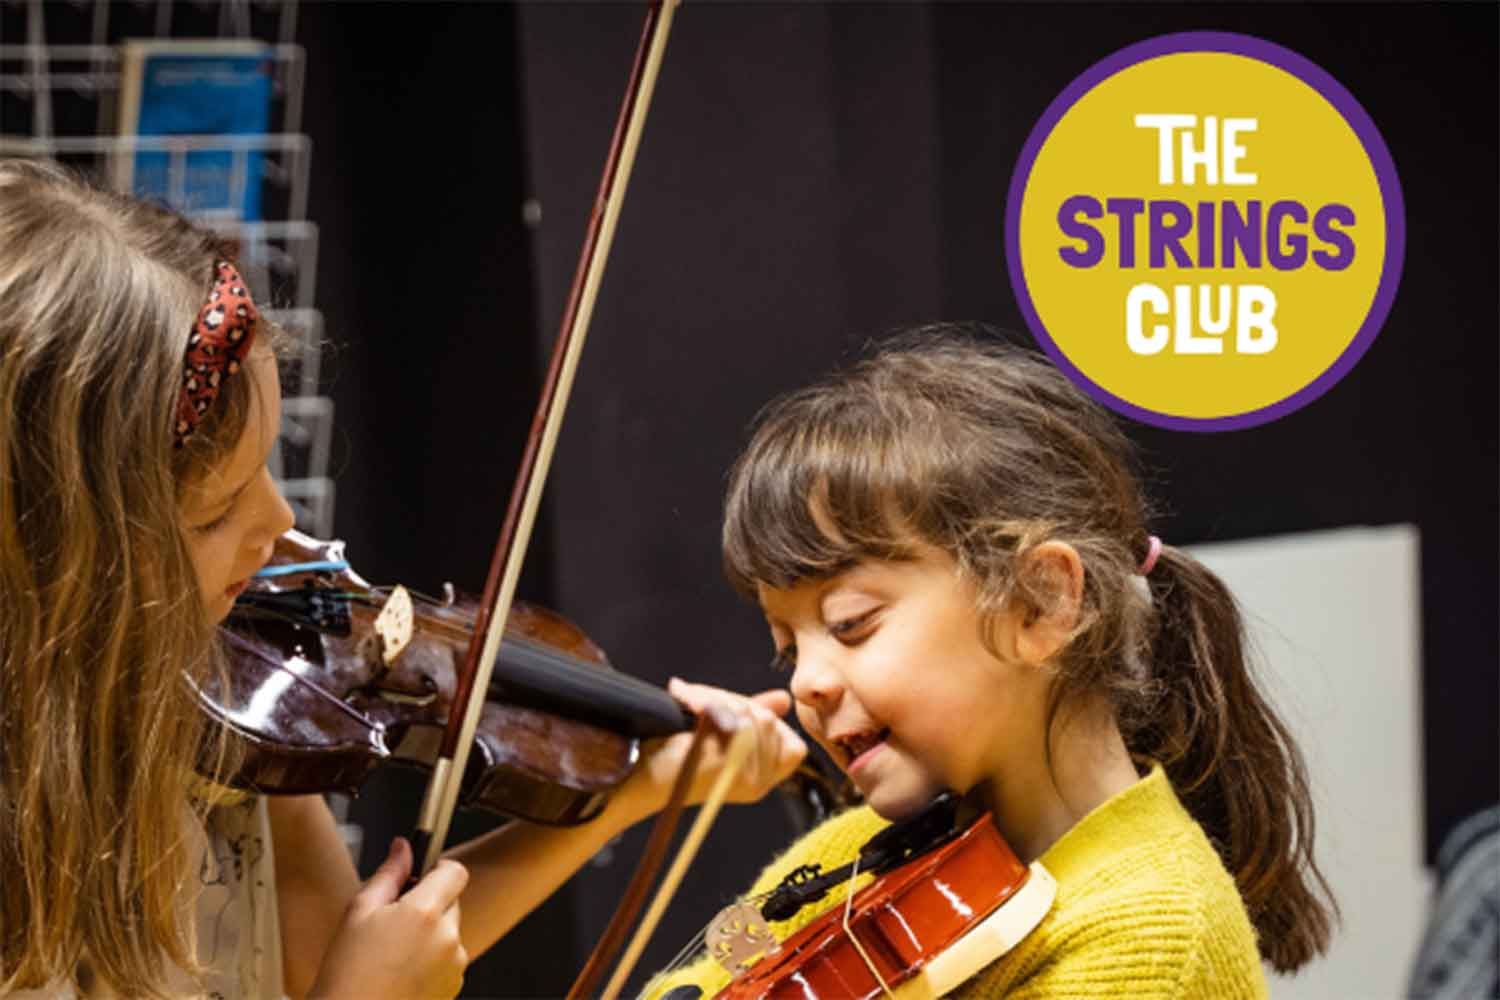 Children learning the violin at The Strings Club summer camp, East London